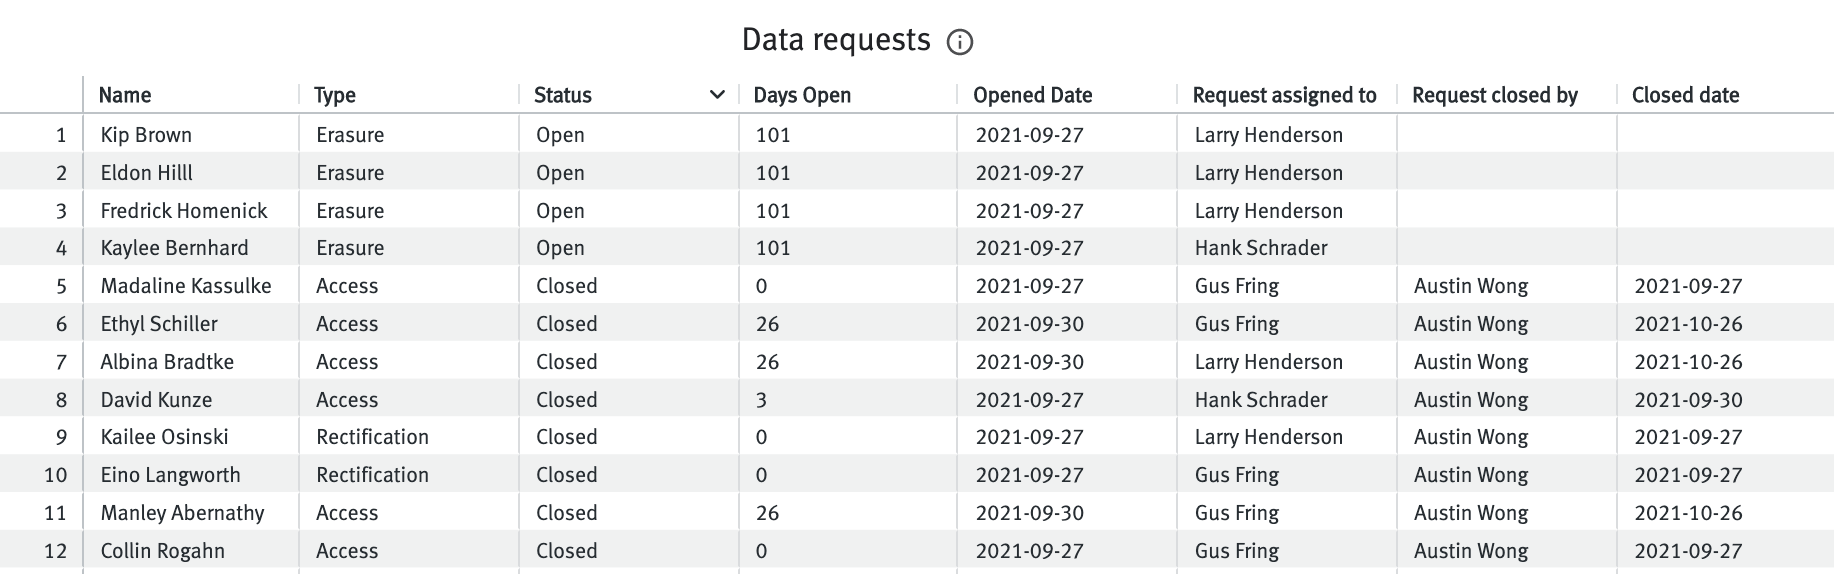 Data requets table in Visual Insights.